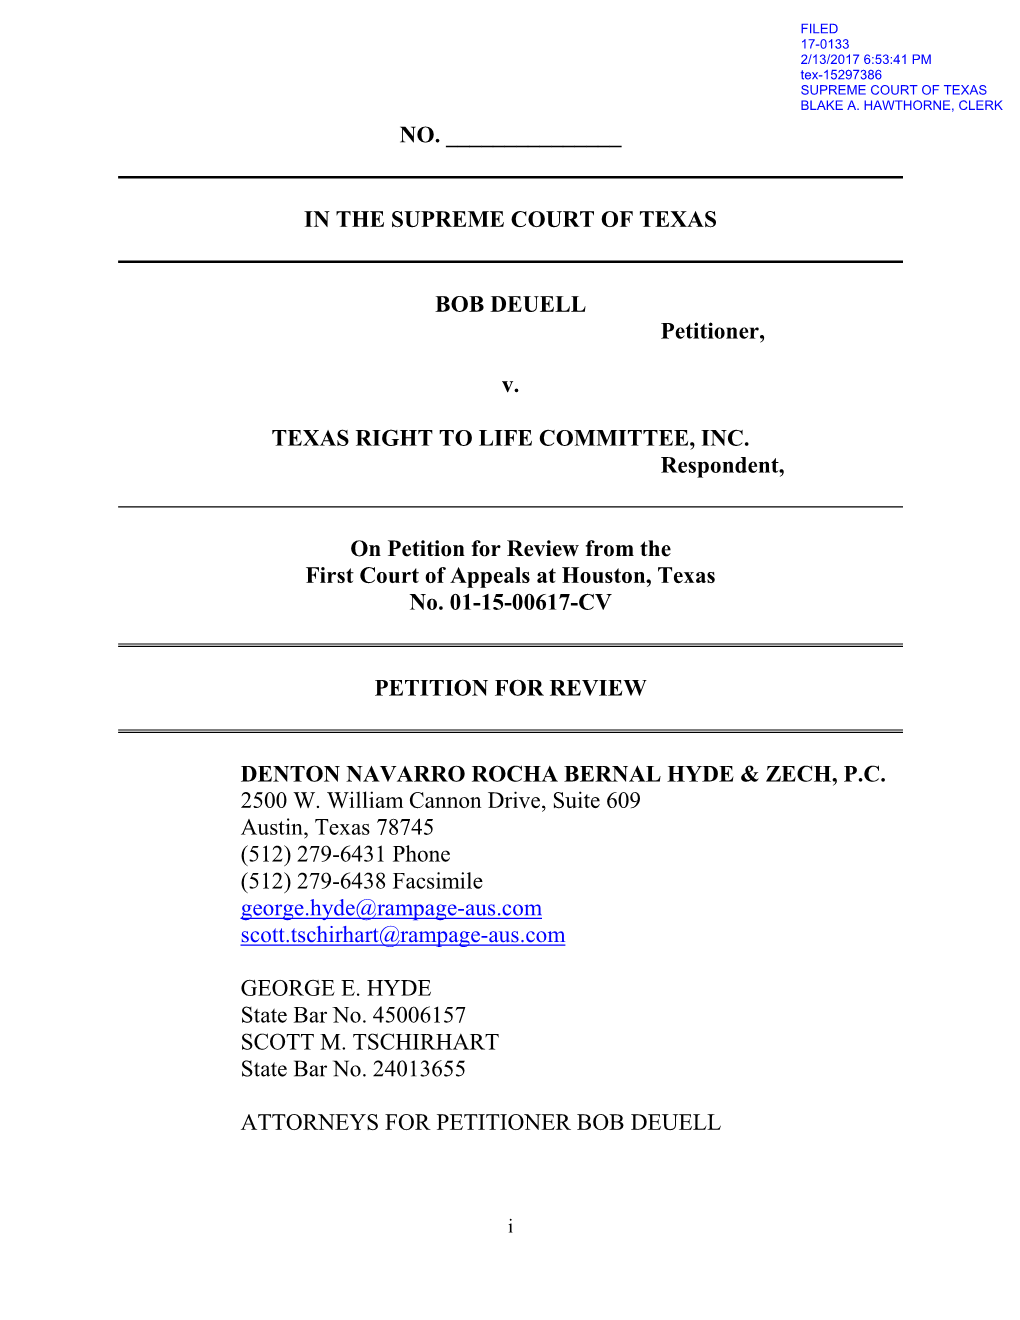 IN the SUPREME COURT of TEXAS BOB DEUELL Petitioner, V. TEXAS